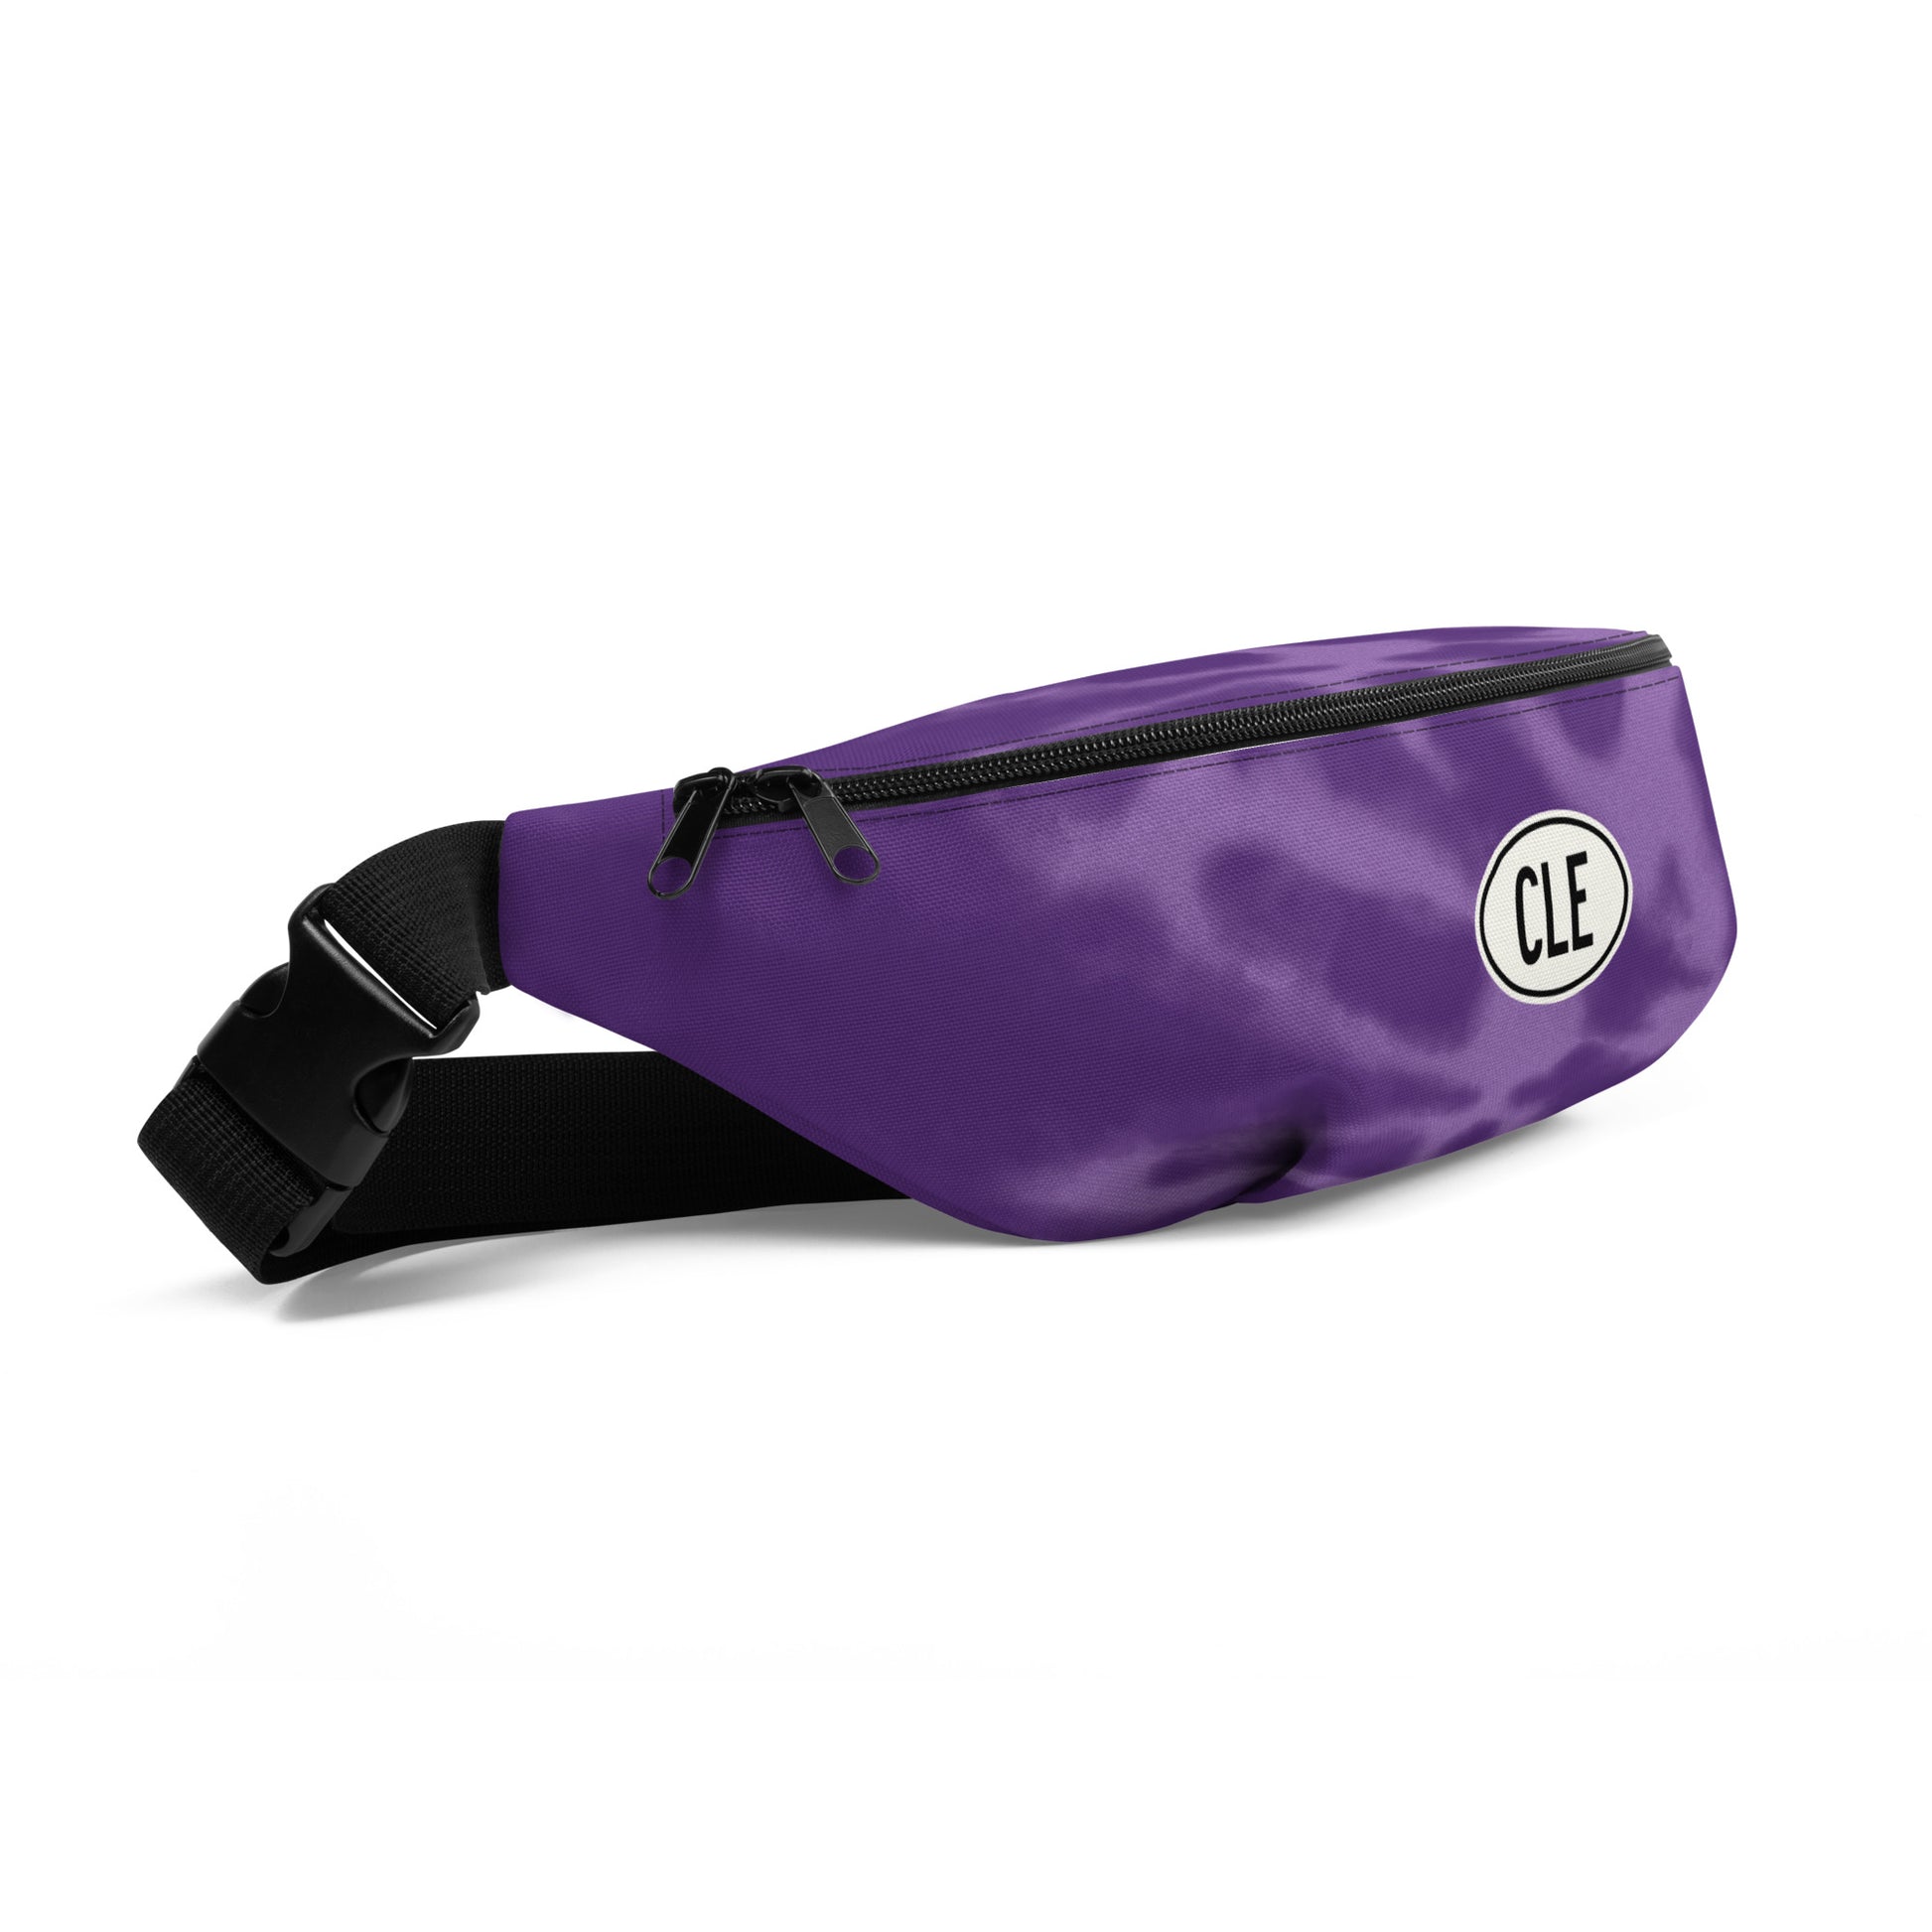 Travel Gift Fanny Pack - Purple Tie-Dye • CLE Cleveland • YHM Designs - Image 07